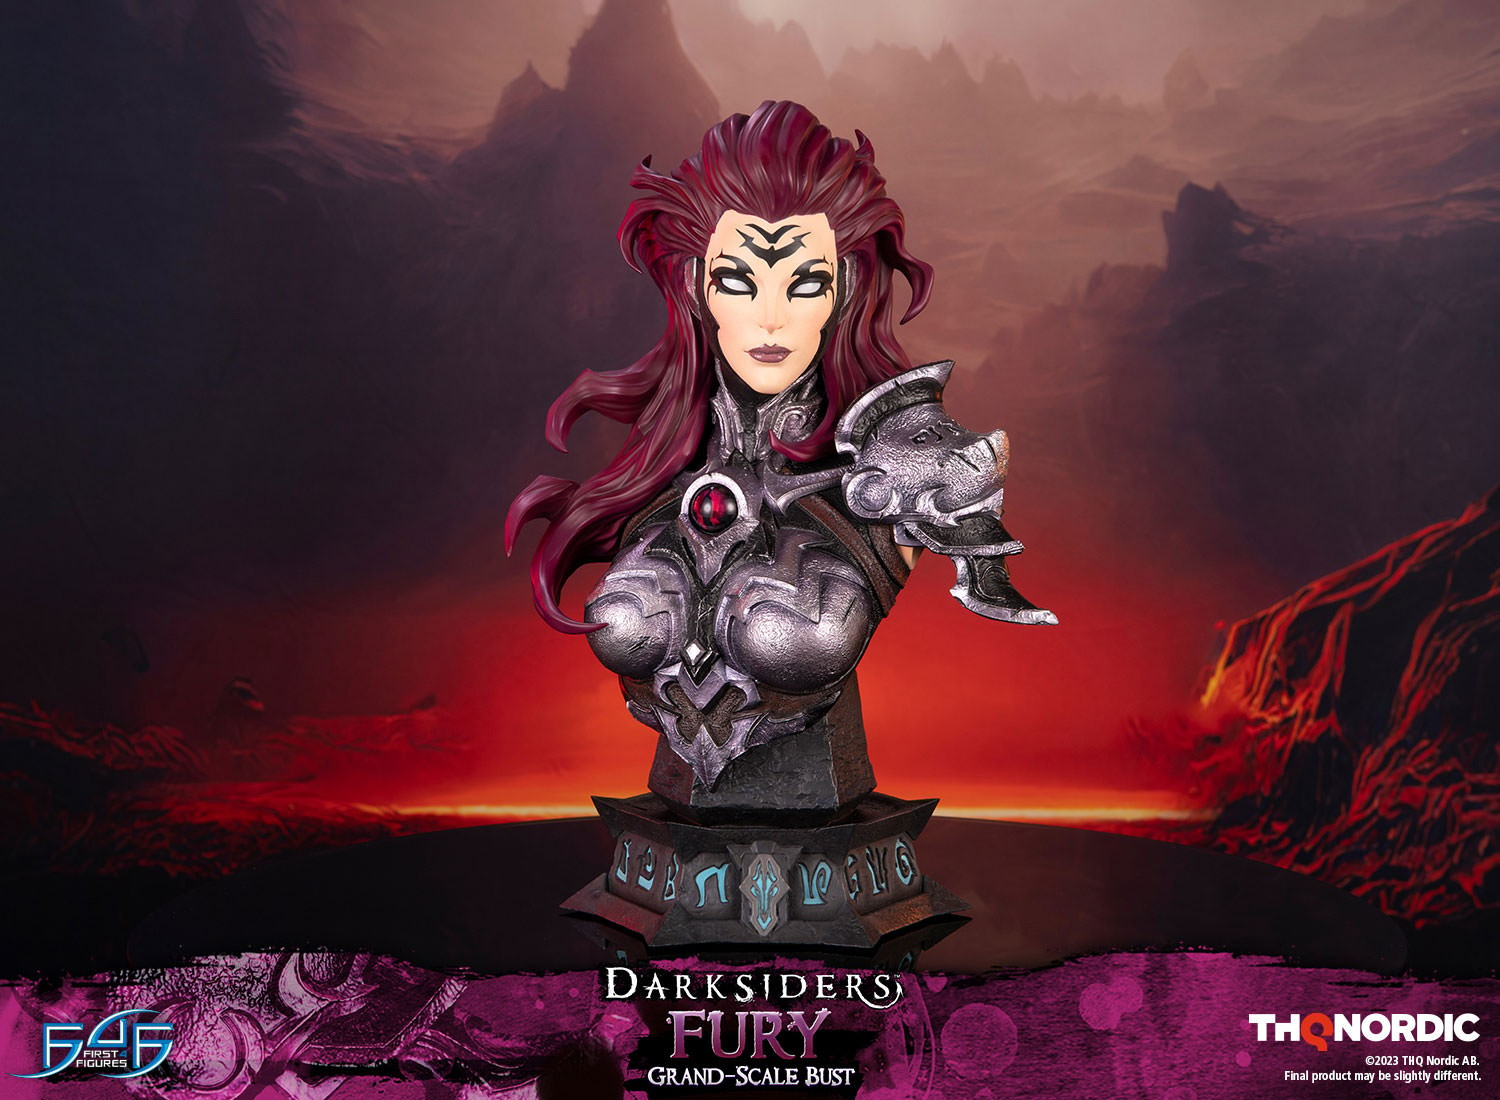 Darksiders Fury Grand-Scale Bust by First 4 Figures | Sideshow 